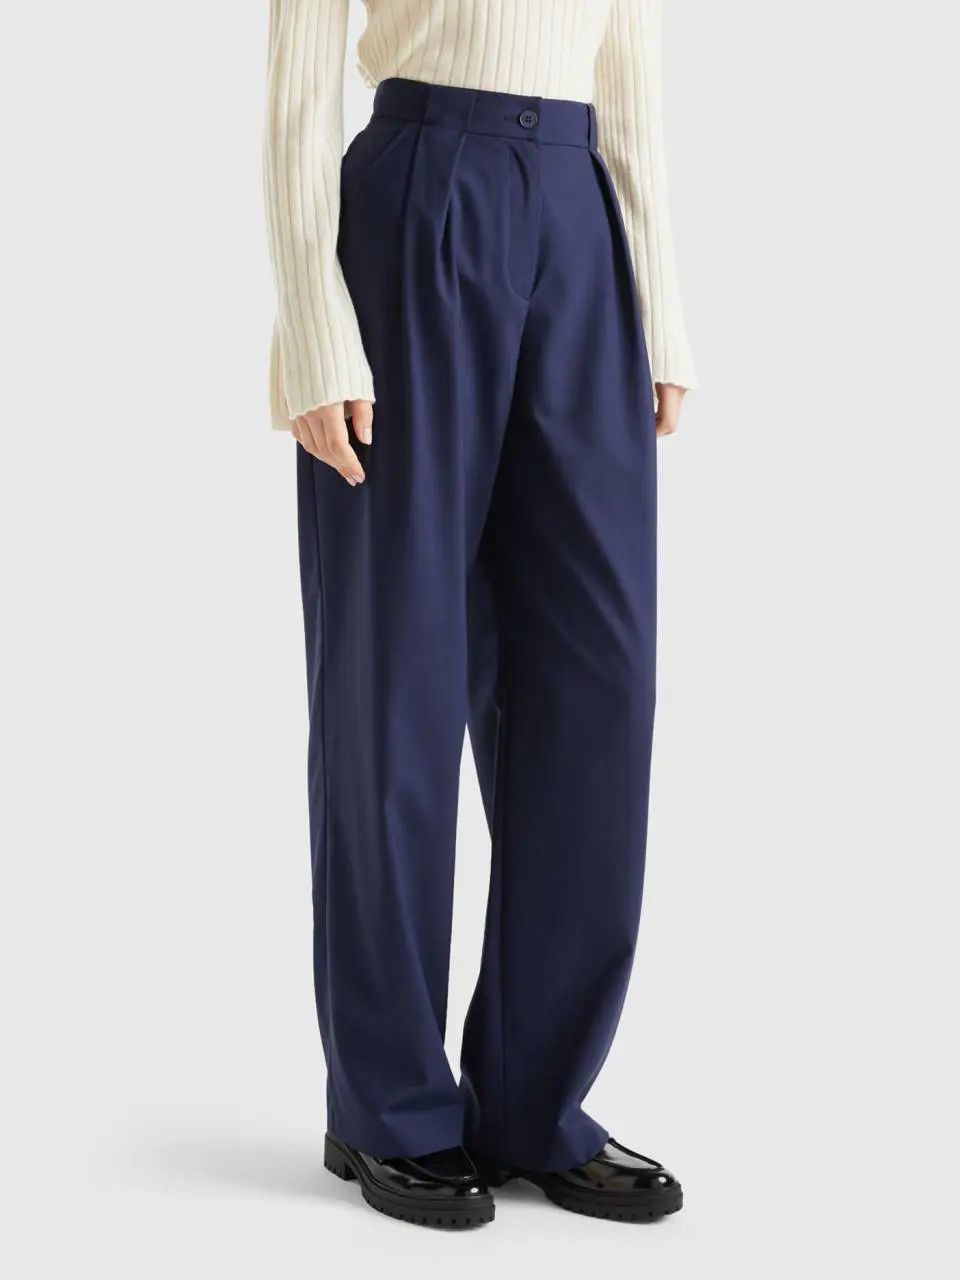 Benetton high-waisted trousers. 1